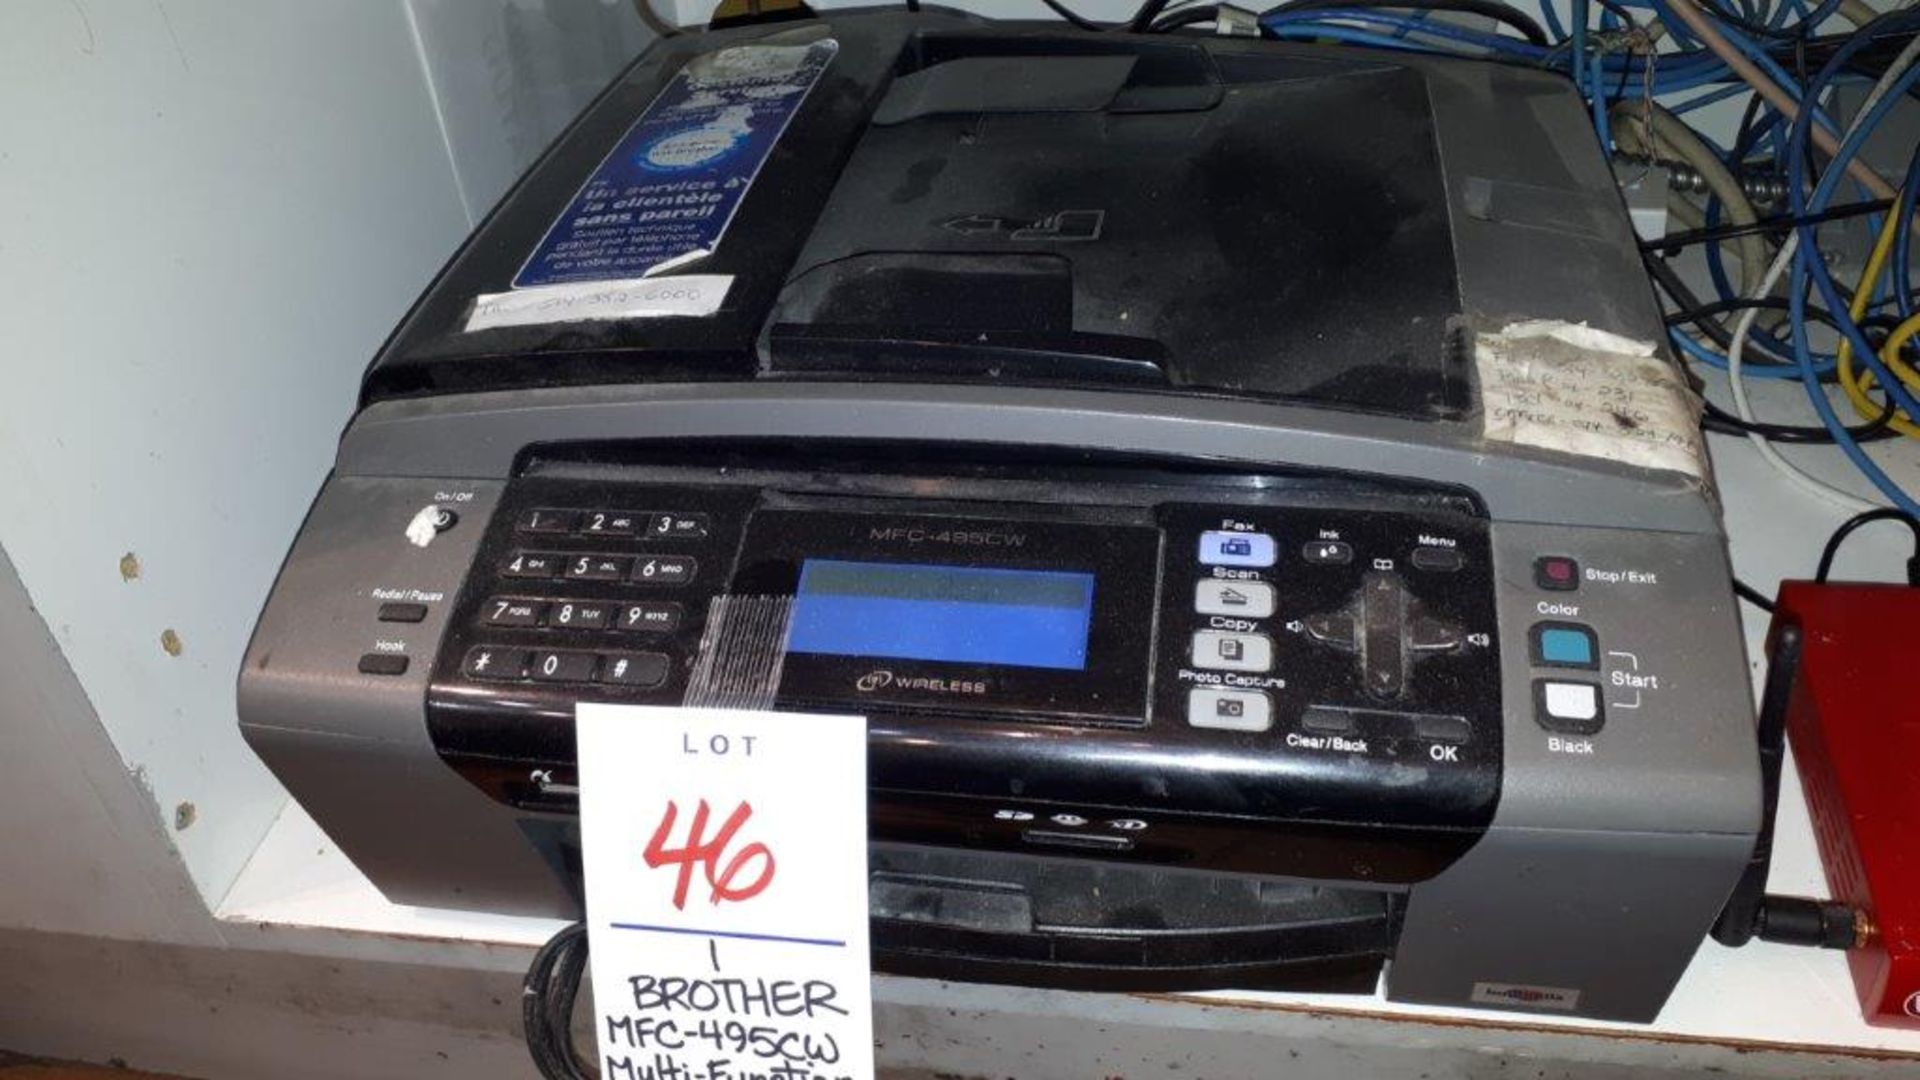 BROTHER MFC-495CW Multi-Function Printer